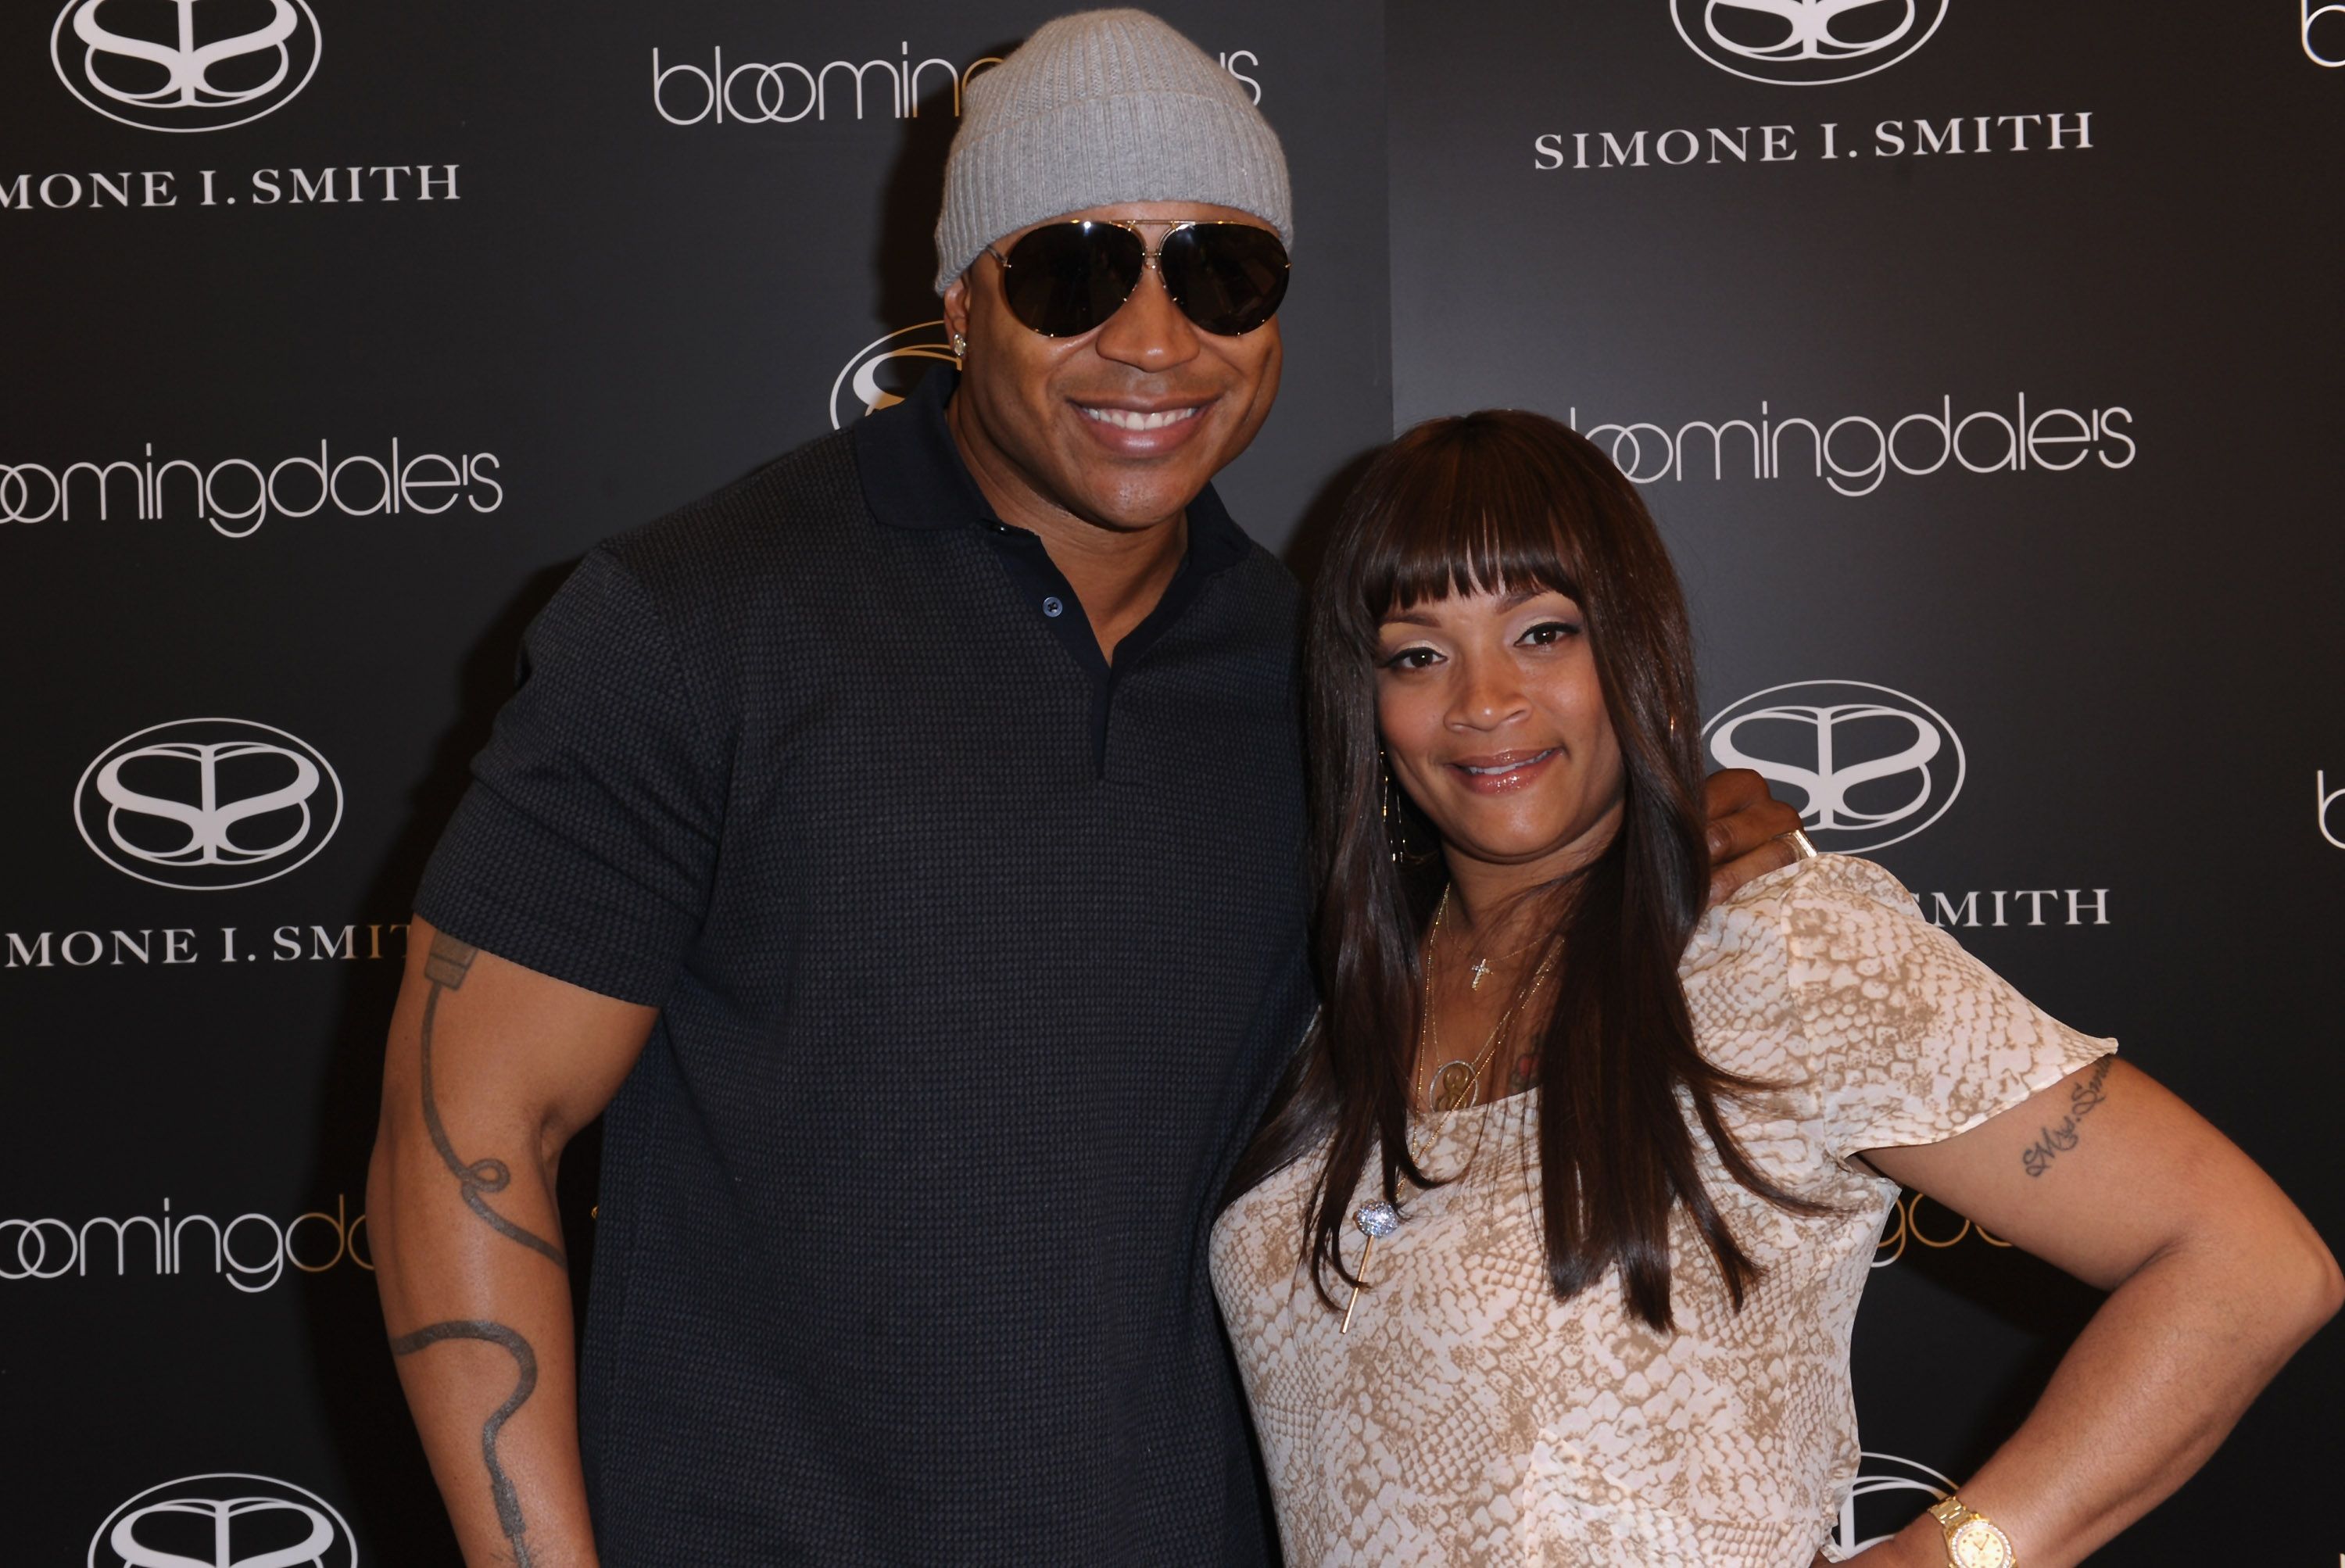 LL Cool J and Simone I. Smith during a personal appearance by the latter at Bloomingdale's on May 12, 2011 in Century City, California. | Source: Getty Images